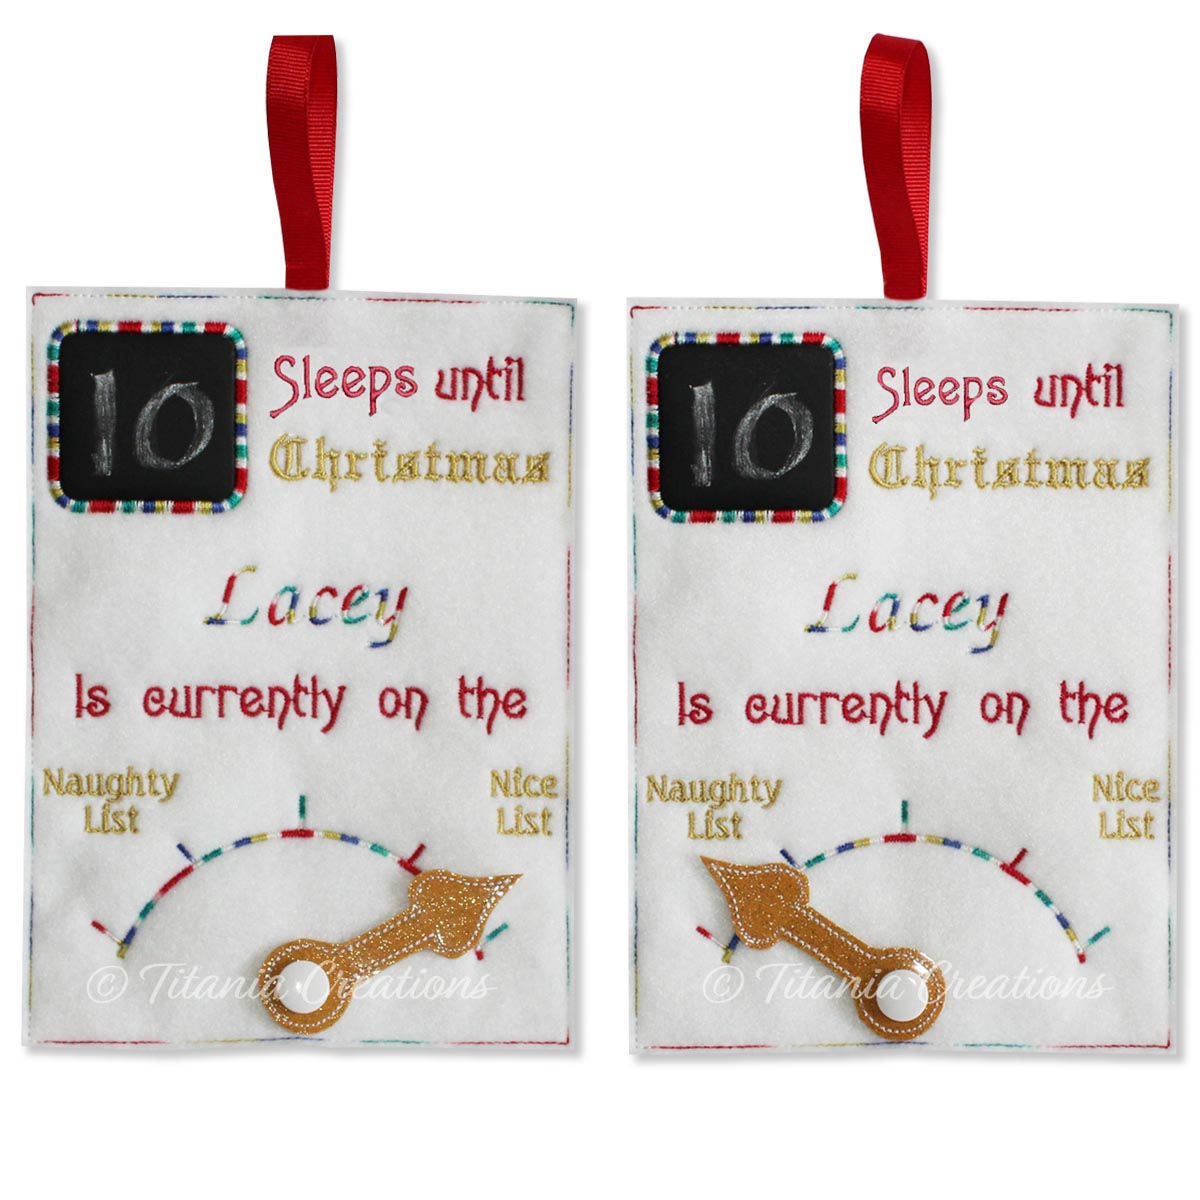 Chalk Board Christmas Countdown Sleeps with Movable Pointer  5x7